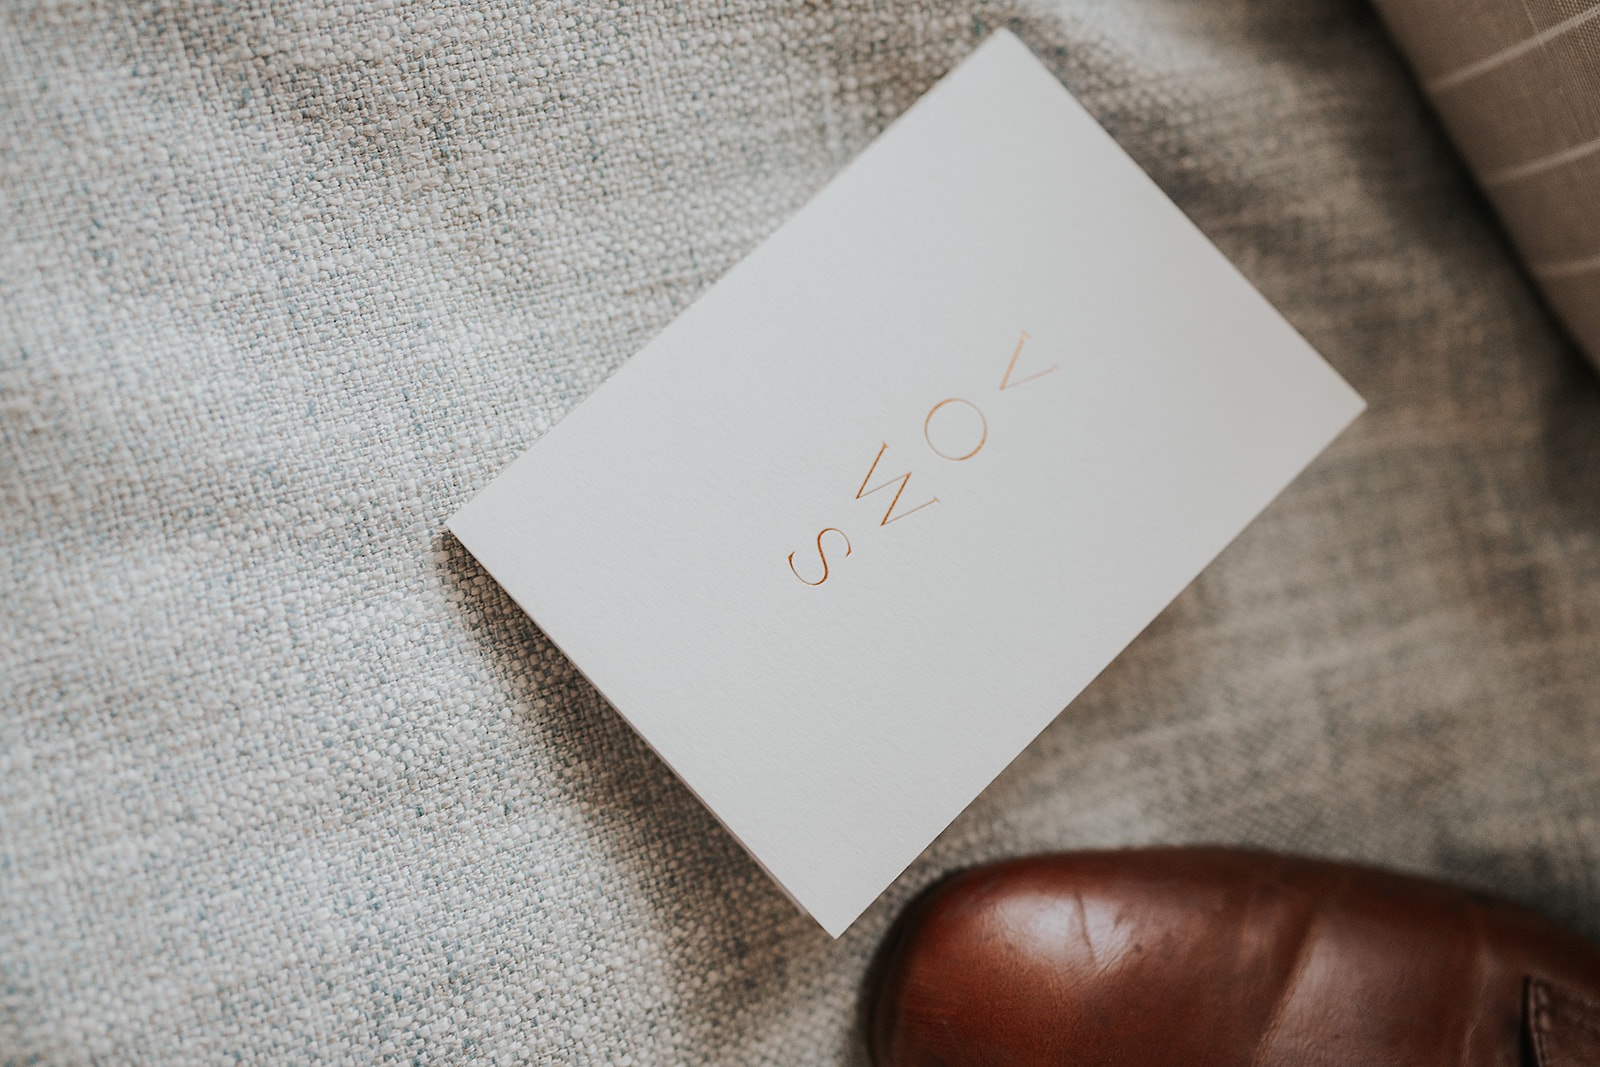 A detail photograph of a groom's vow book before the ceremony.